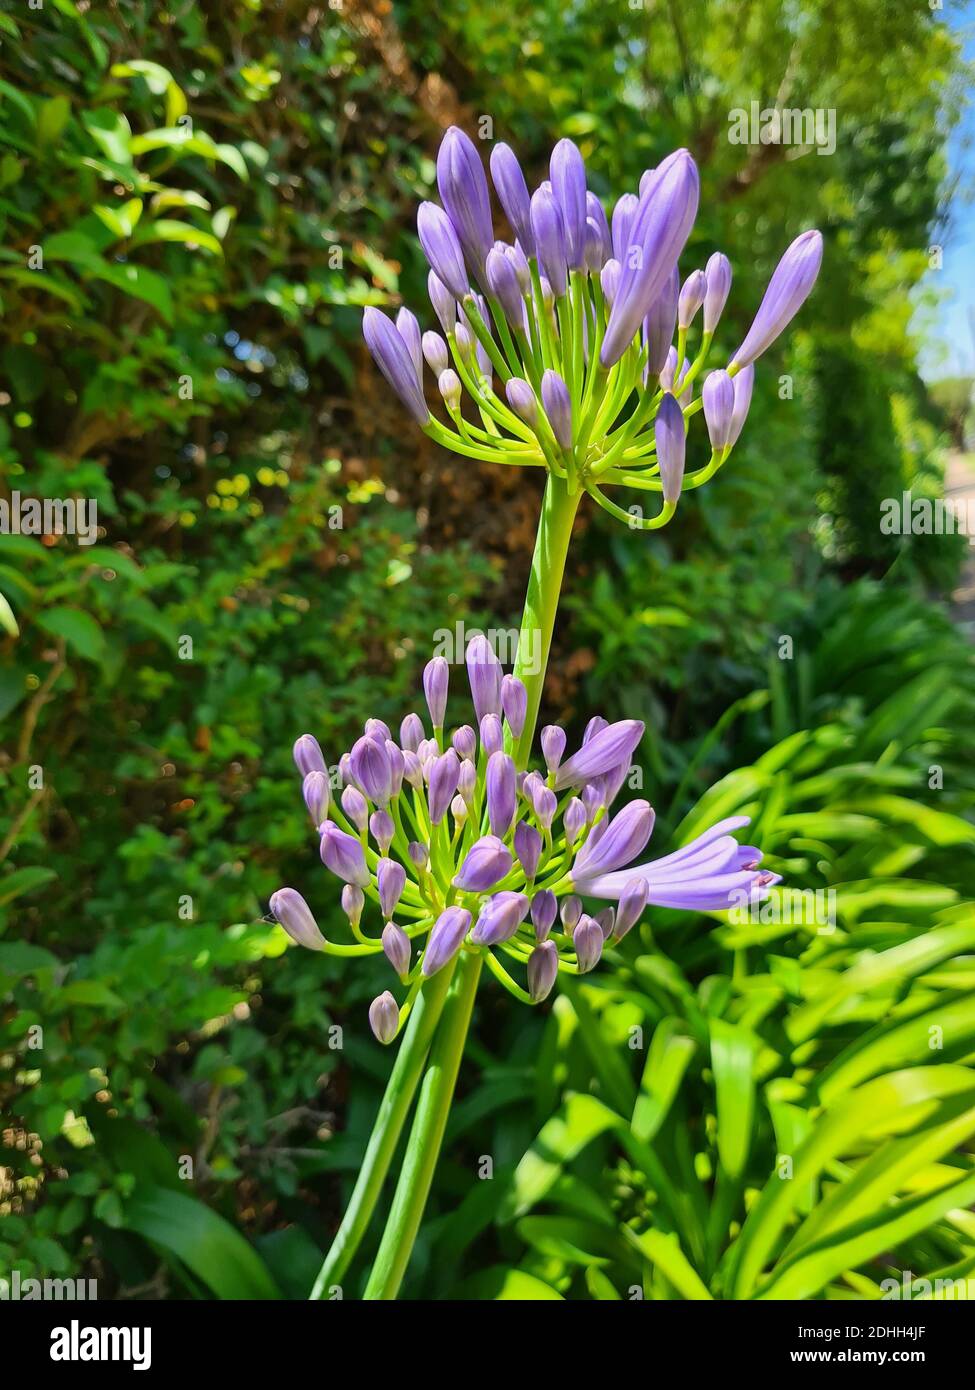 A vertical shot of agapanthus flowers in the field Stock Photo